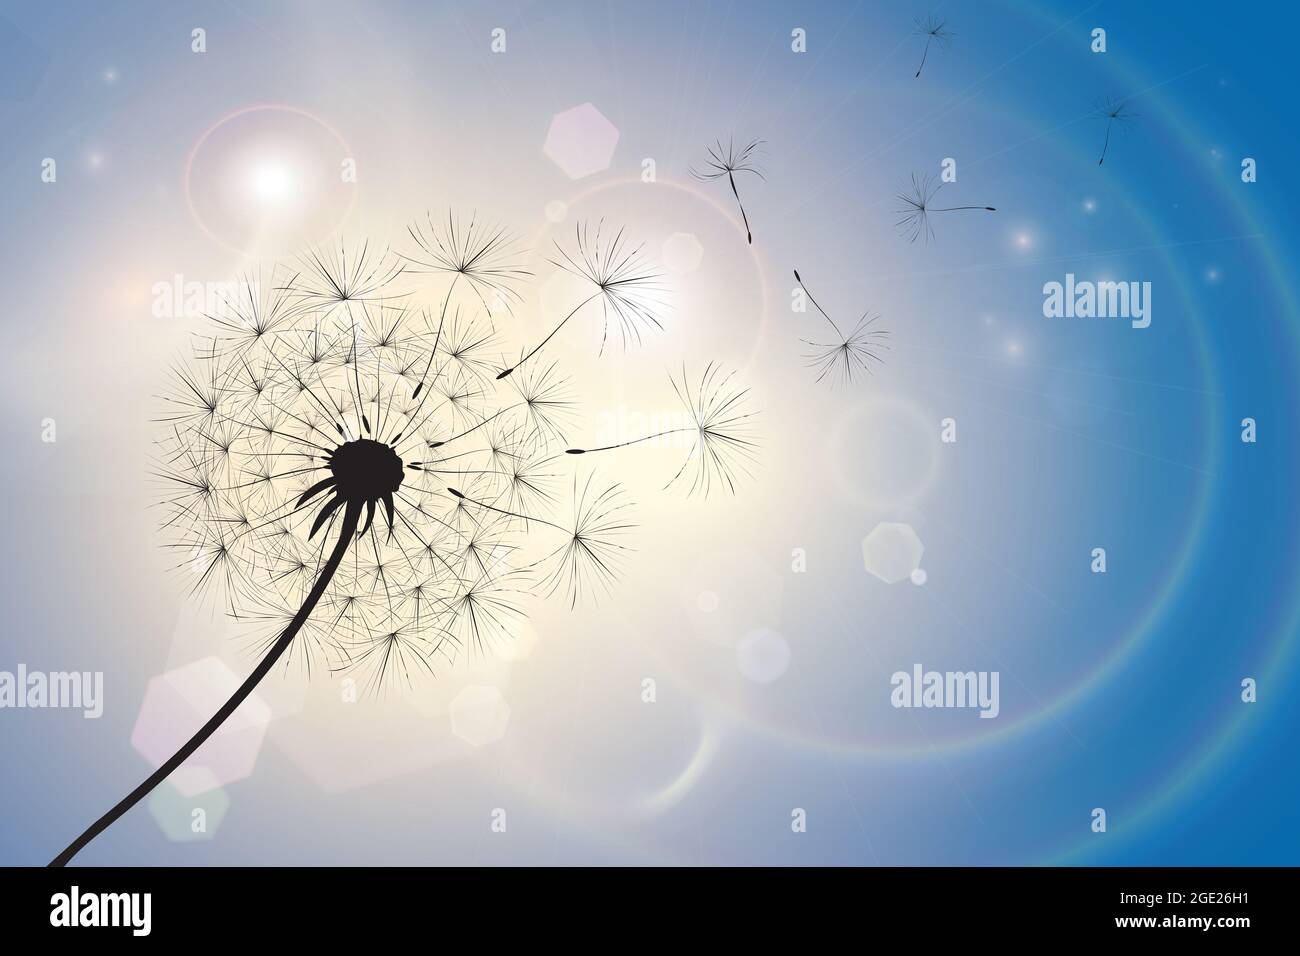 Silhouette of a dandelion with seeds blowing in a summer breeze. Blue sky bokeh background with sunlight and light flares. EPS10 vector format space f Stock Photo